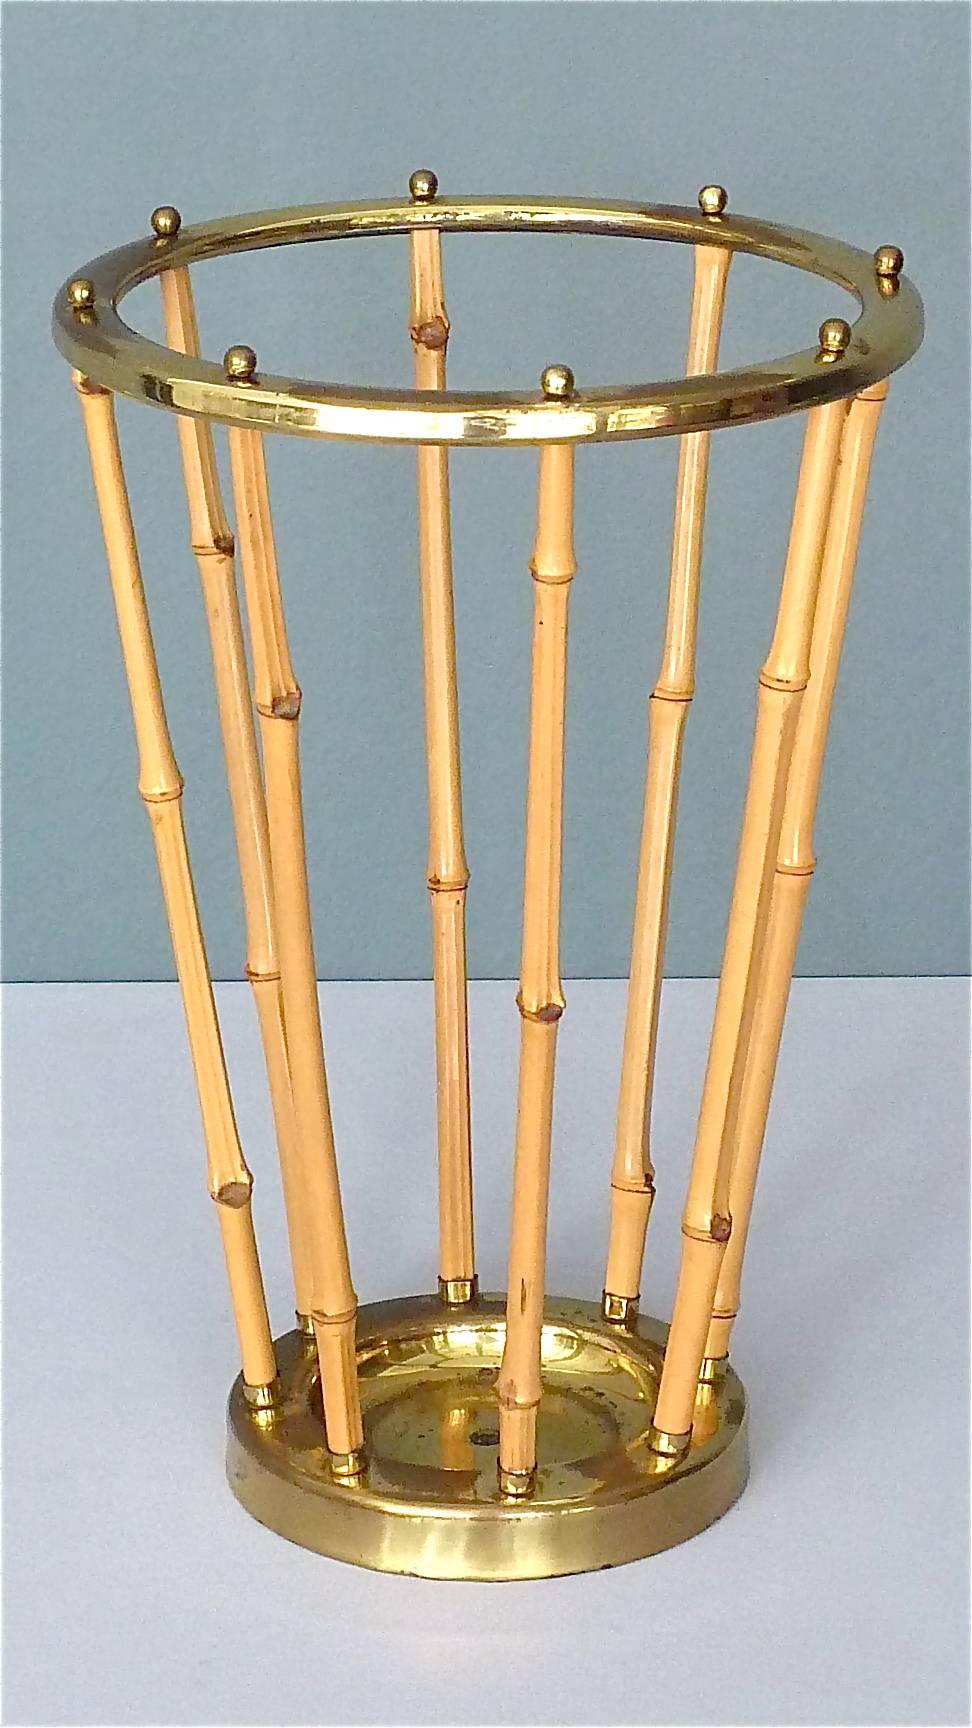 Midcentury Austrian Umbrella Stand Patinated Brass Bamboo Josef Frank Style 1950 For Sale 11